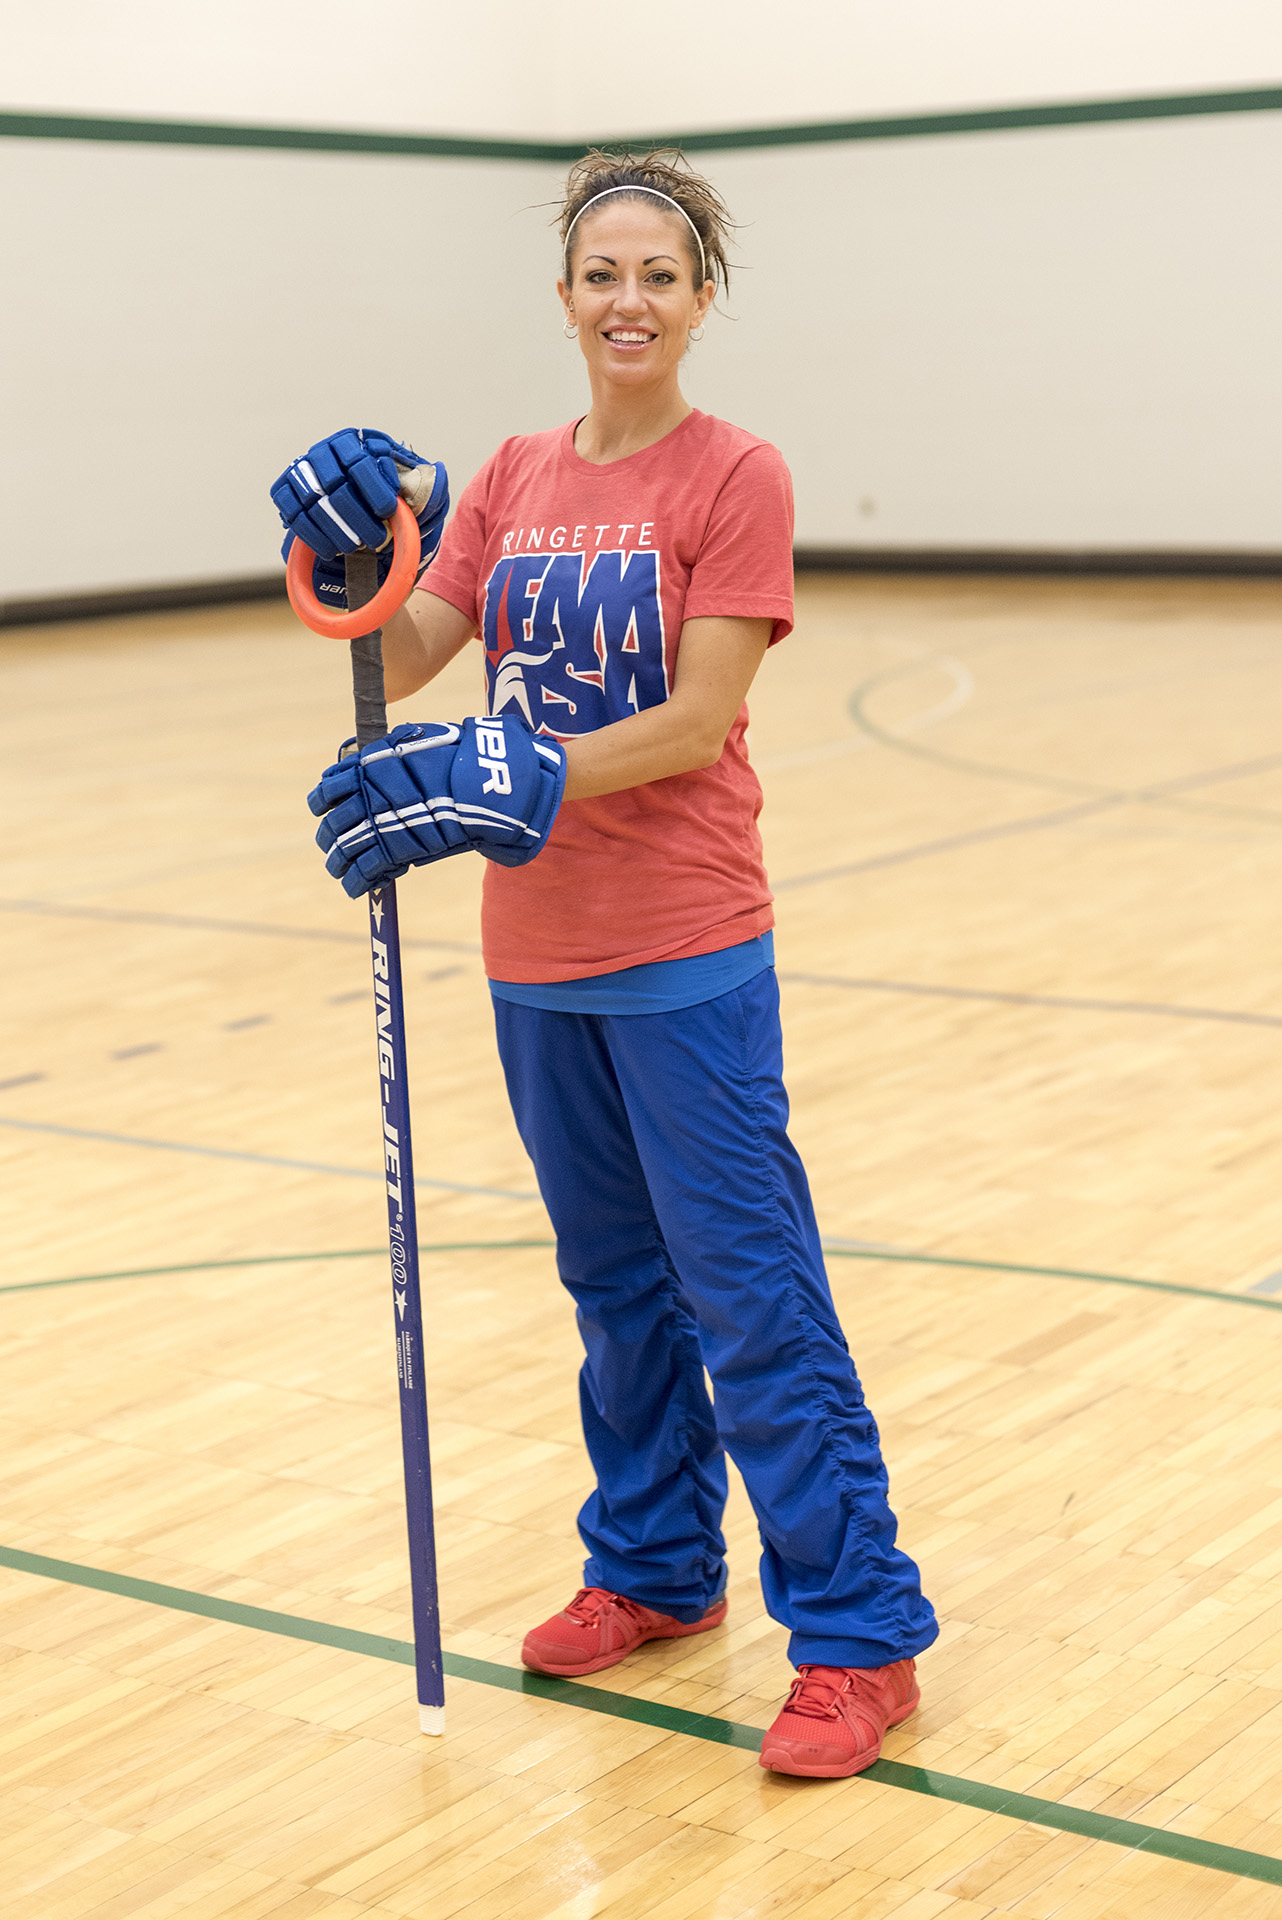 Renee Hoppe in gym with ringette gear